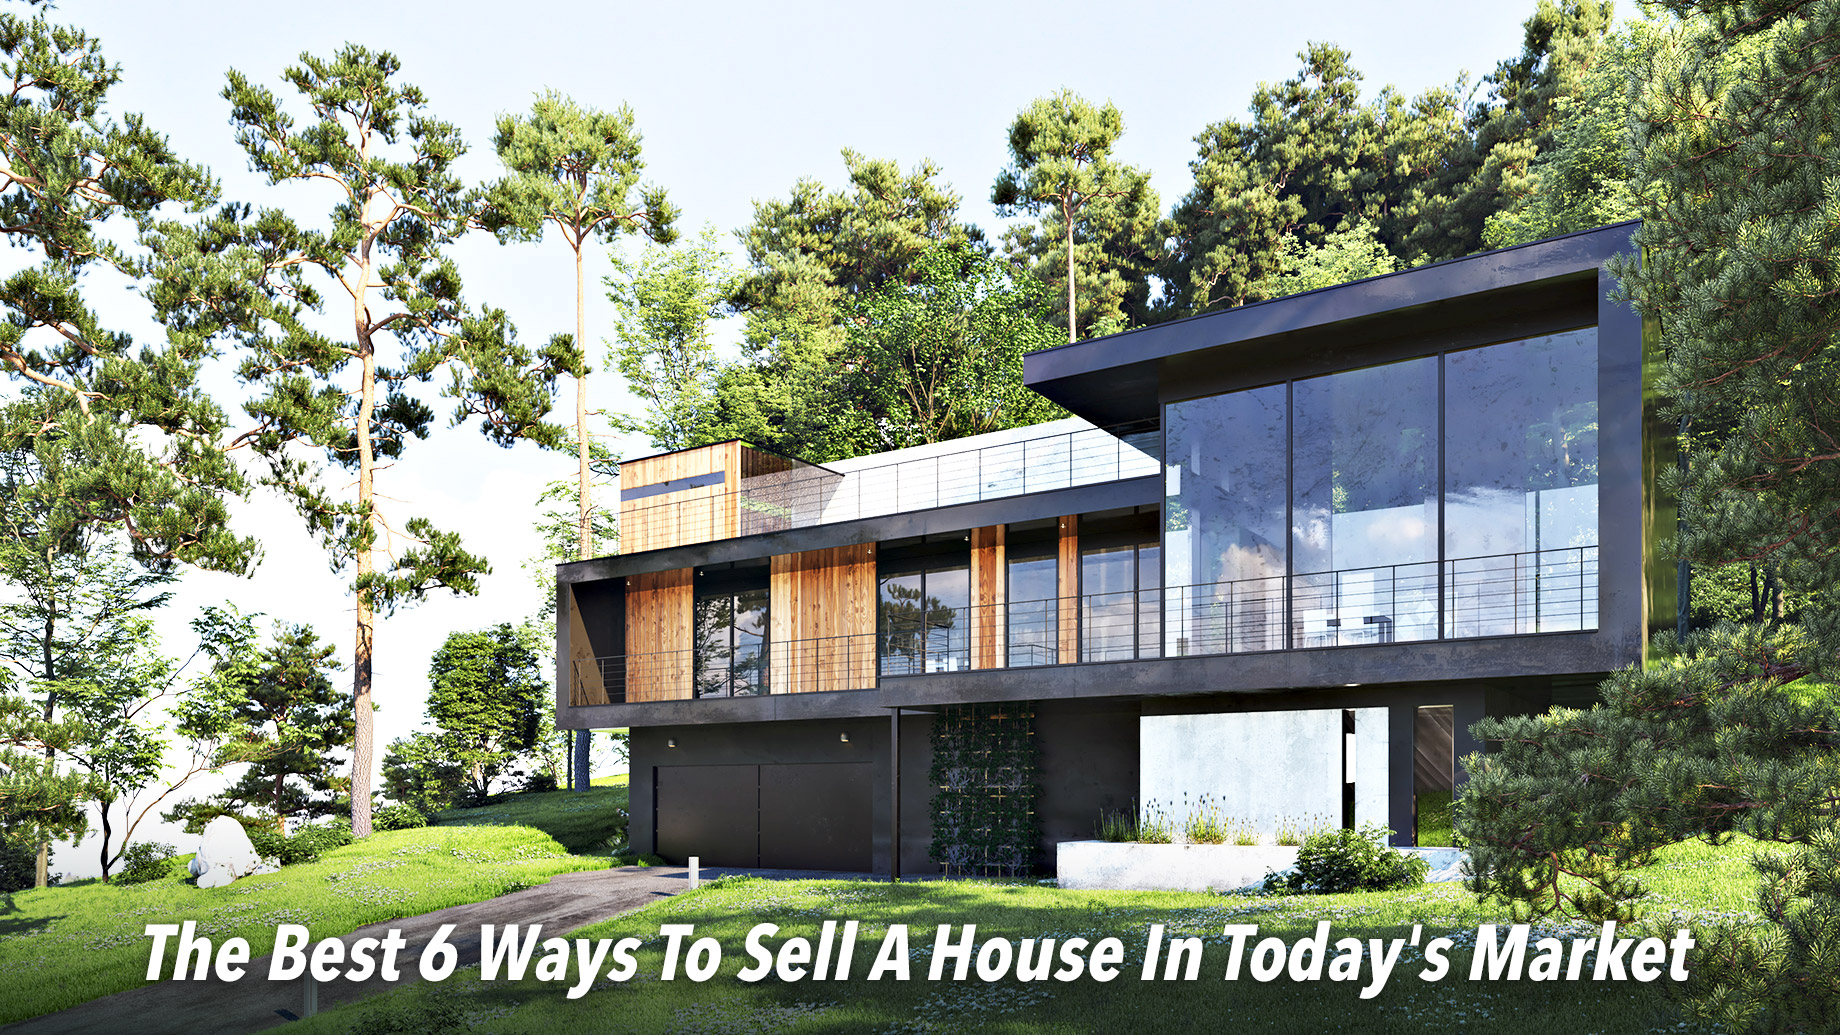 The Best 6 Ways To Sell A House In Today's Market